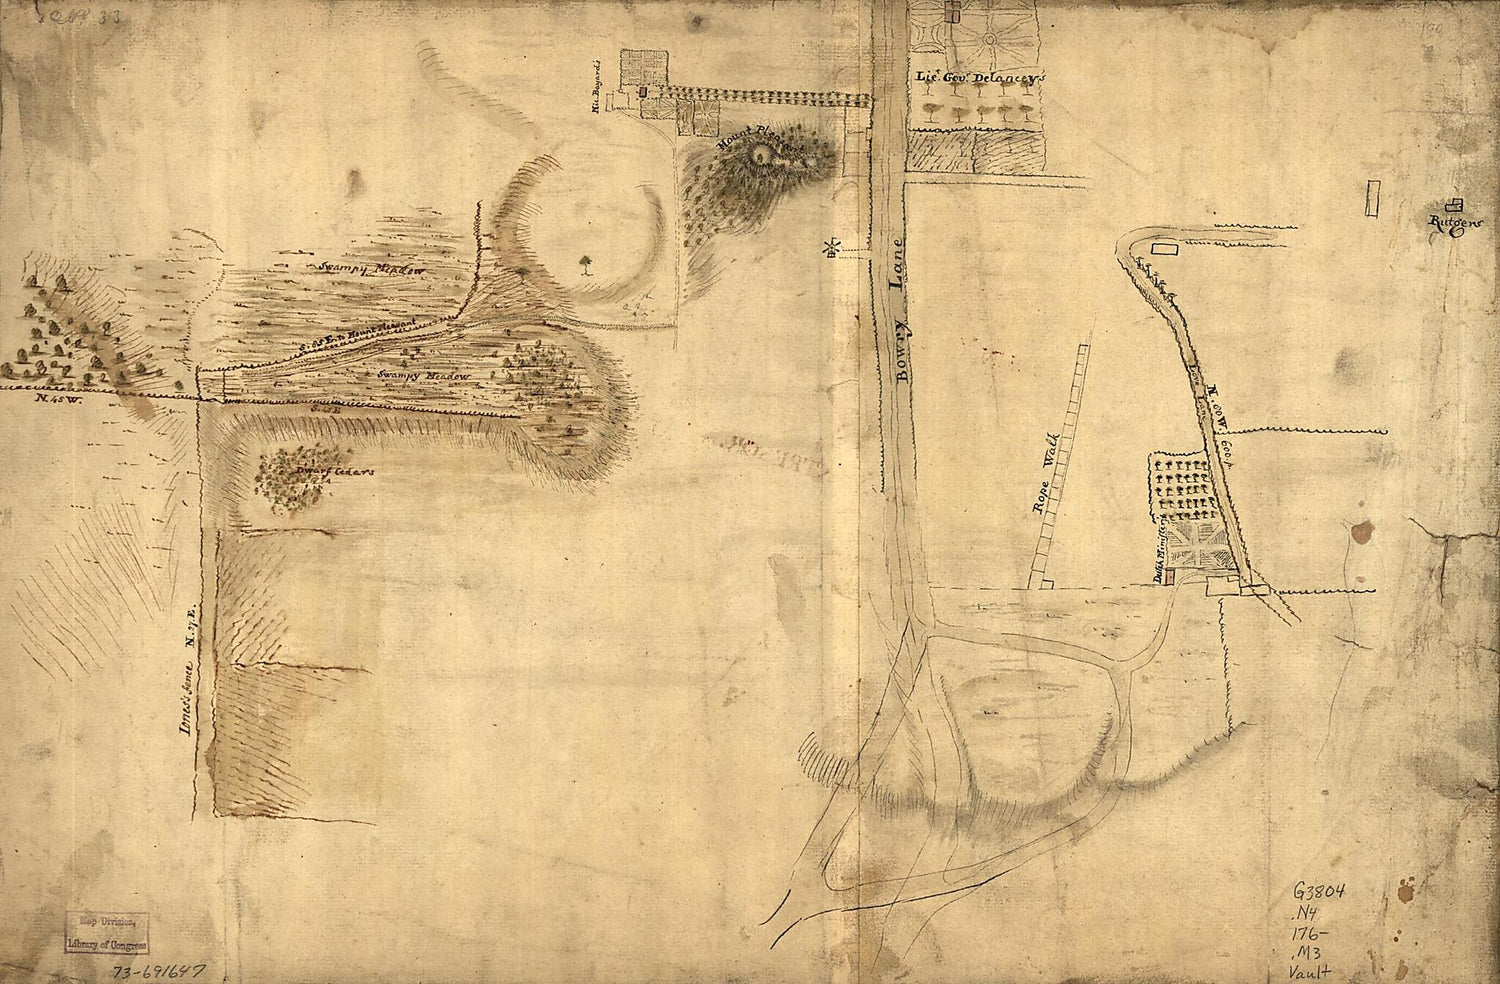 This old map of Map Showing the Bowery Lane Area of Manhattan from 1760 was created by John Montrésor in 1760